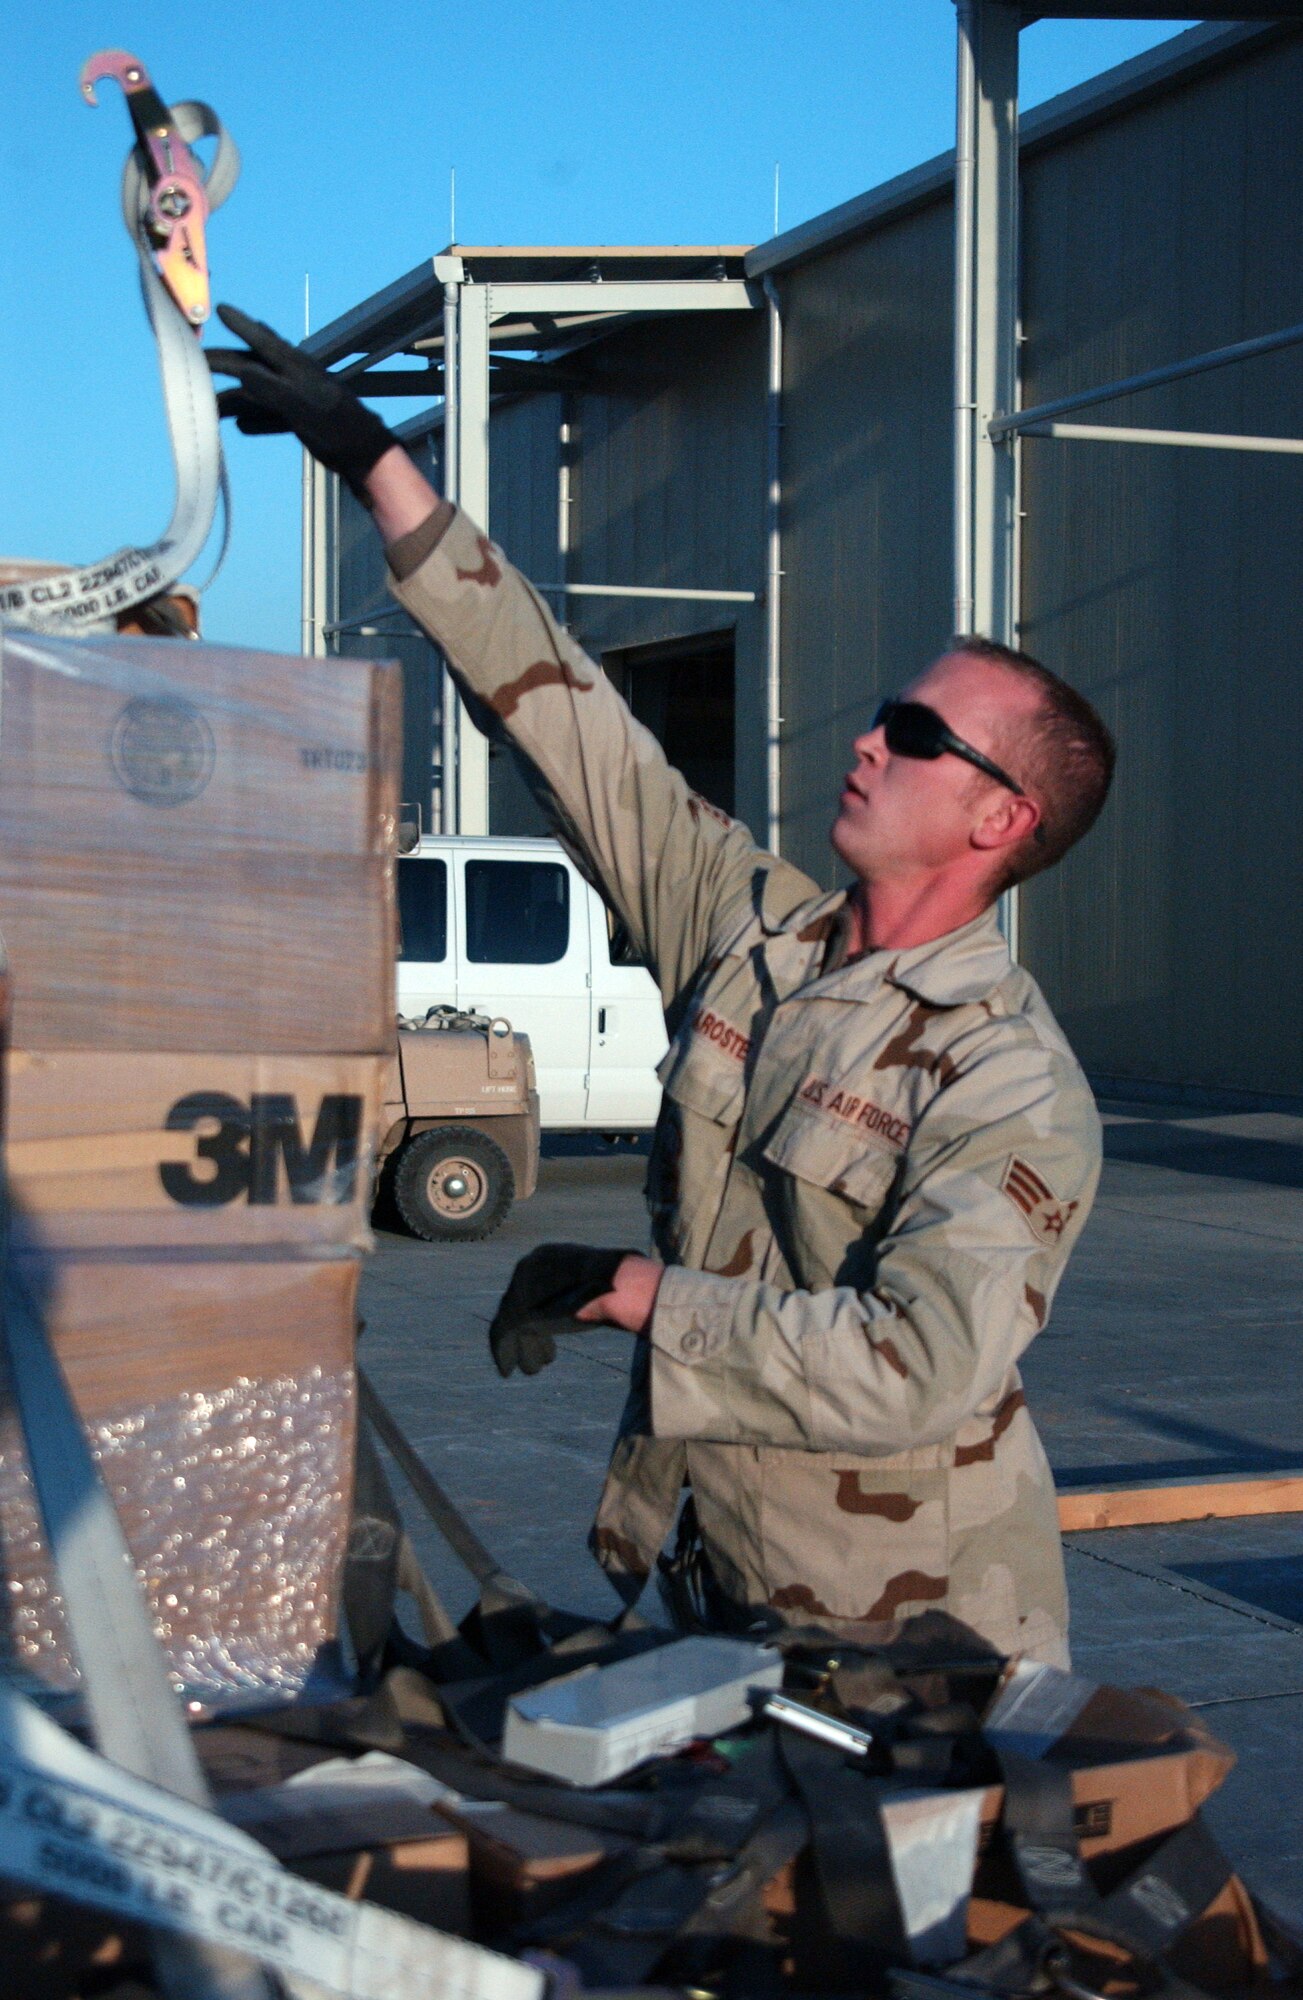 BALAD AIR BASE, Iraq - Senior Airman Scott Maroste, 332nd Expeditionary air transportation cargo processor, breaks down a pallet here Nov. 24. Airman Maroste is deployed from Travis Air Force Base, Calif. (U.S. Air Force photo by Staff Sgt. Alice Moore)                                